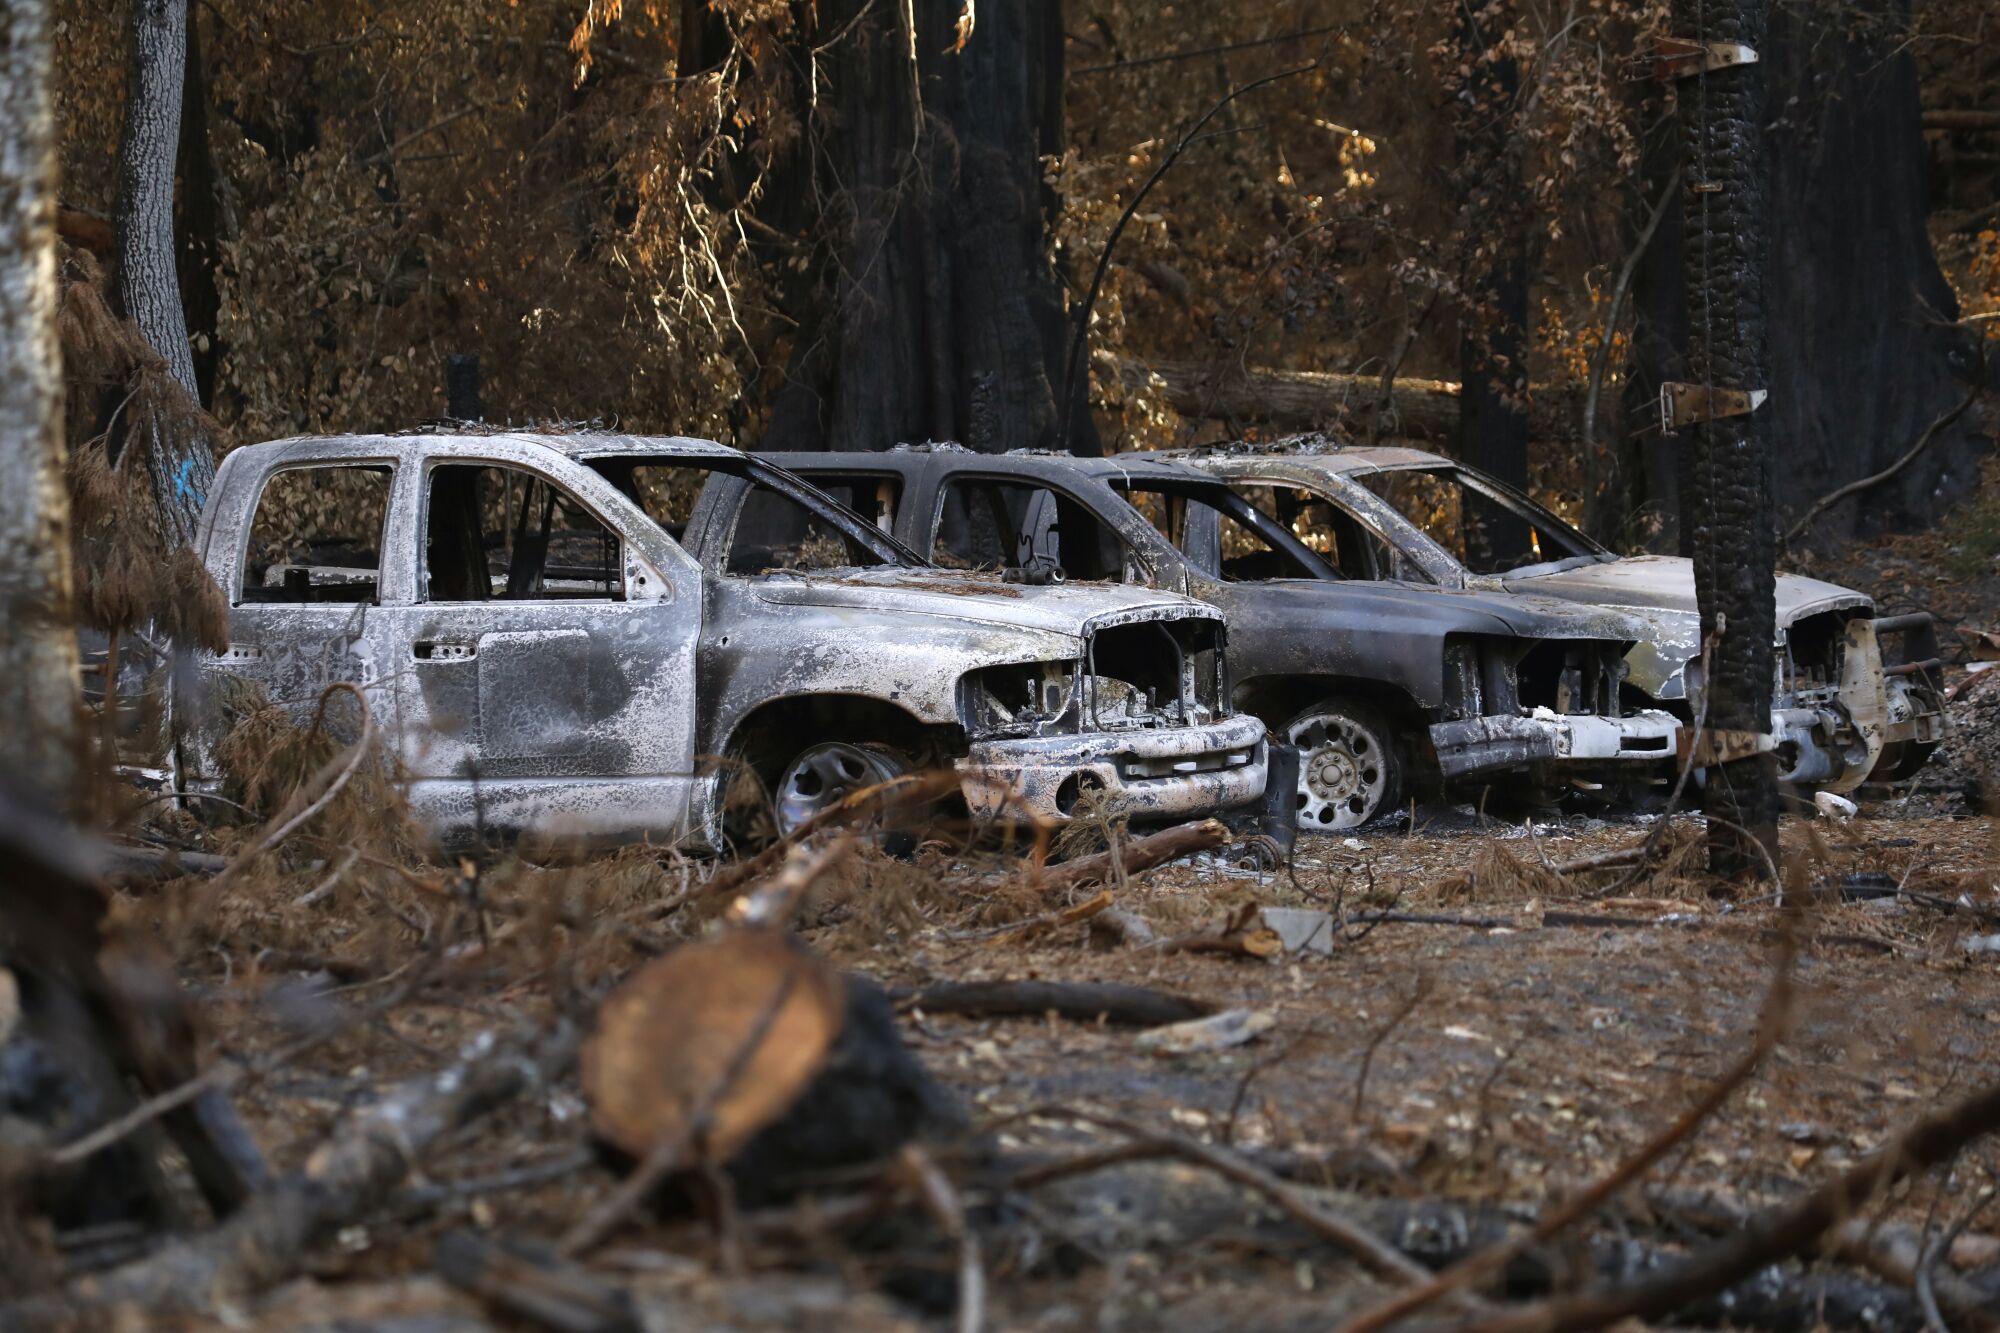 A row of charred vehicles sits in Big Basin Redwoods State Park.